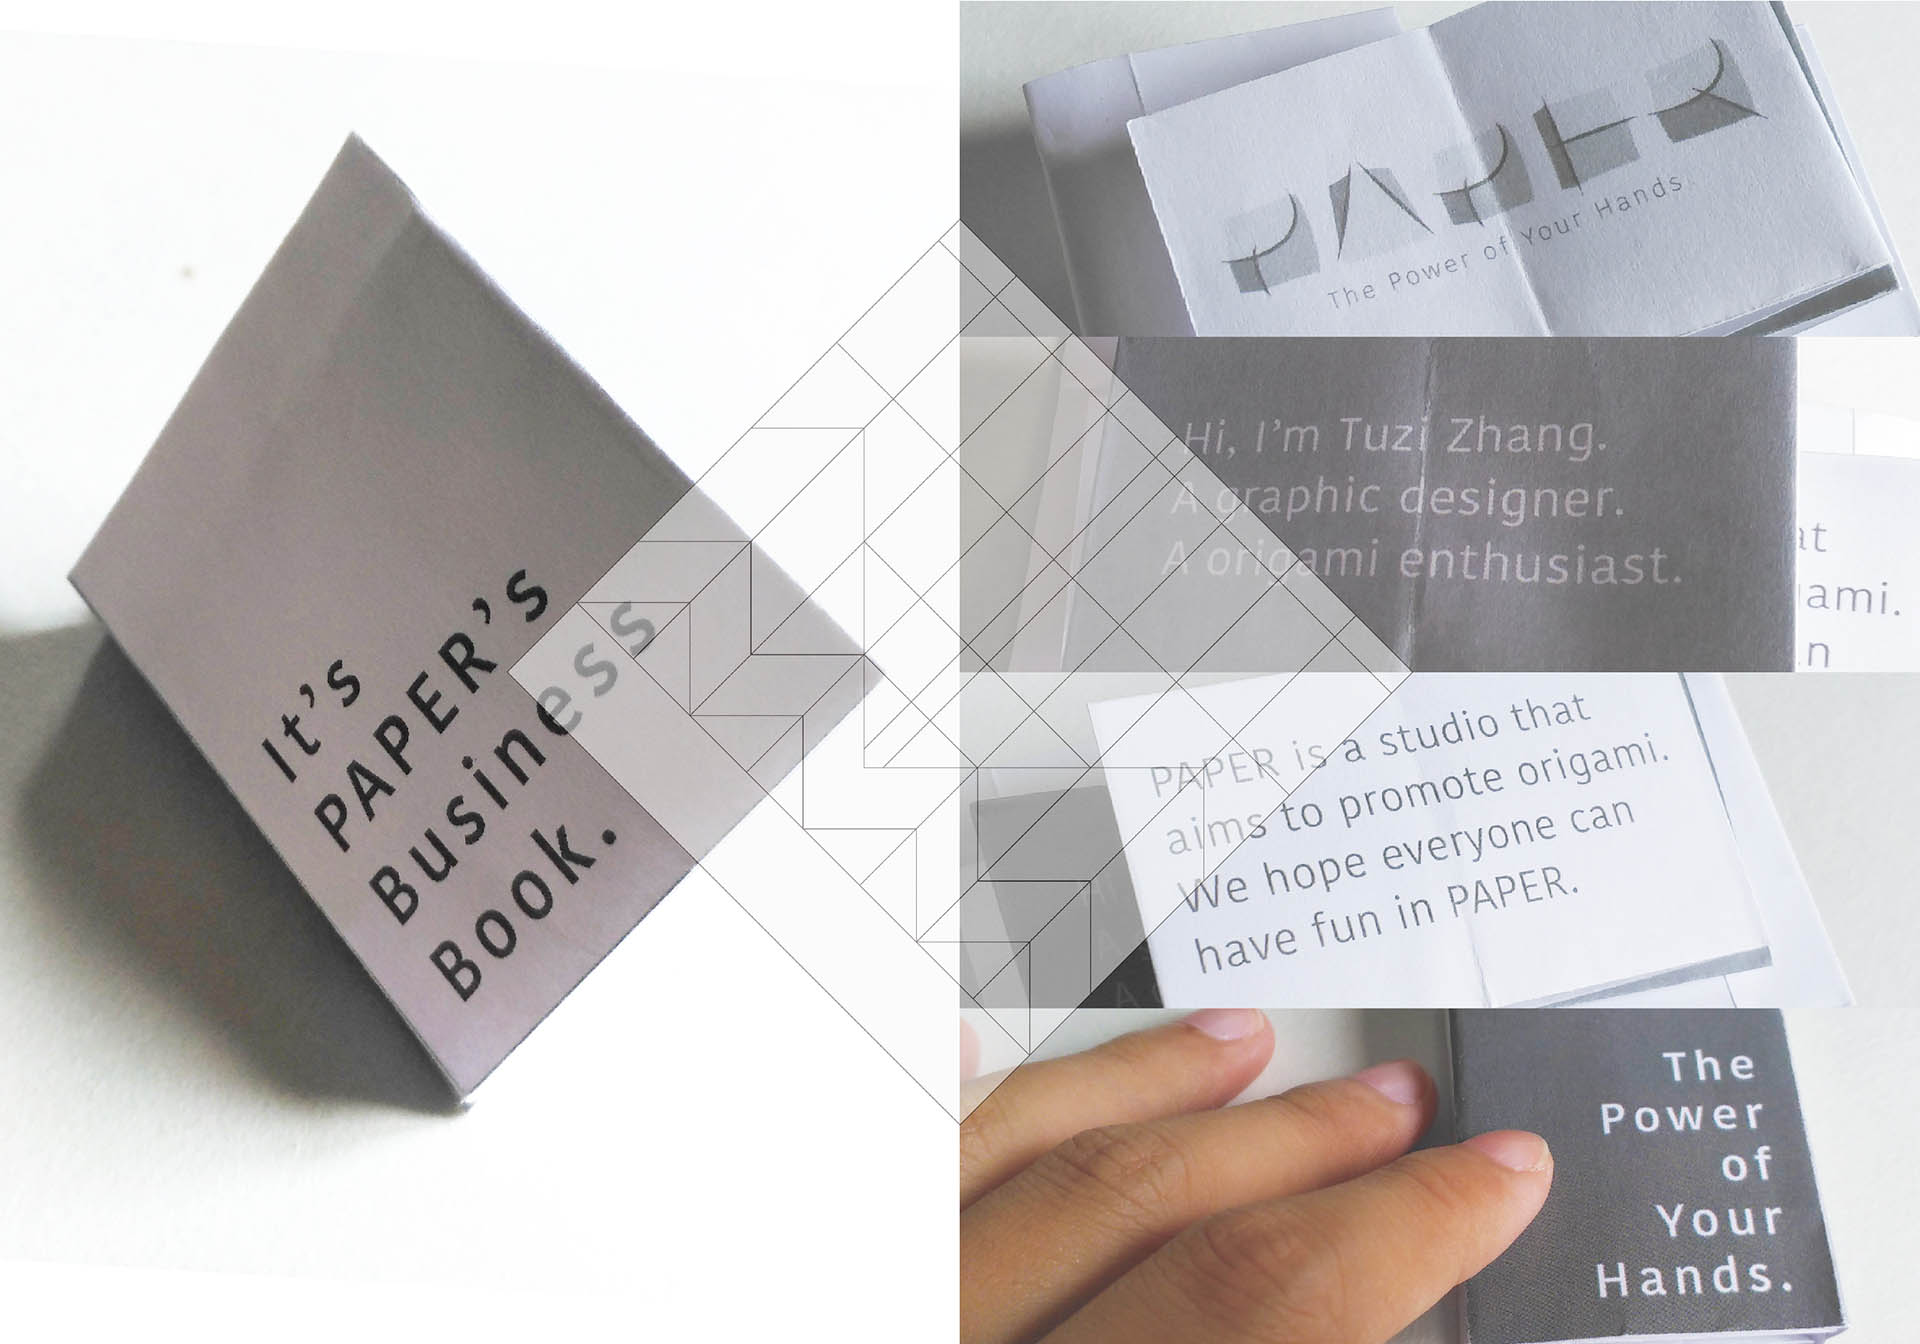 Promotional material for Paper